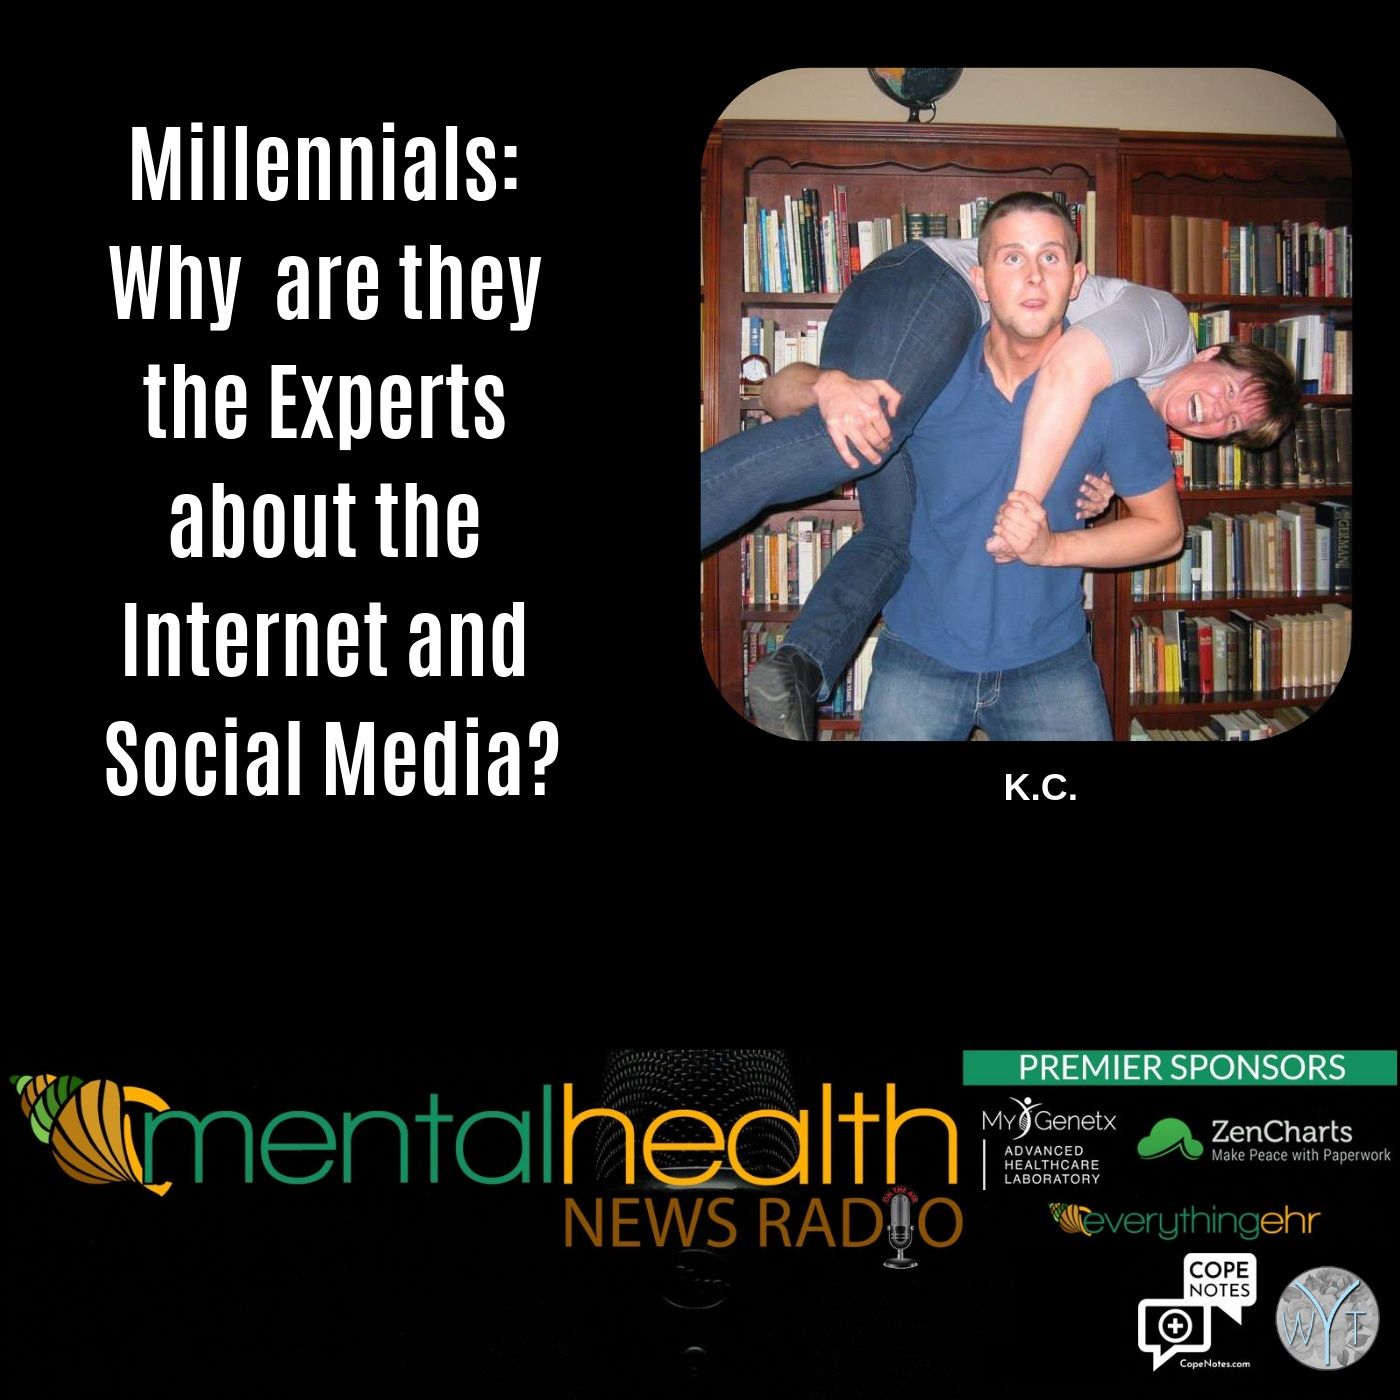 Mental Health News Radio - Millennials: Why are they Experts About the Internet and Social Media?